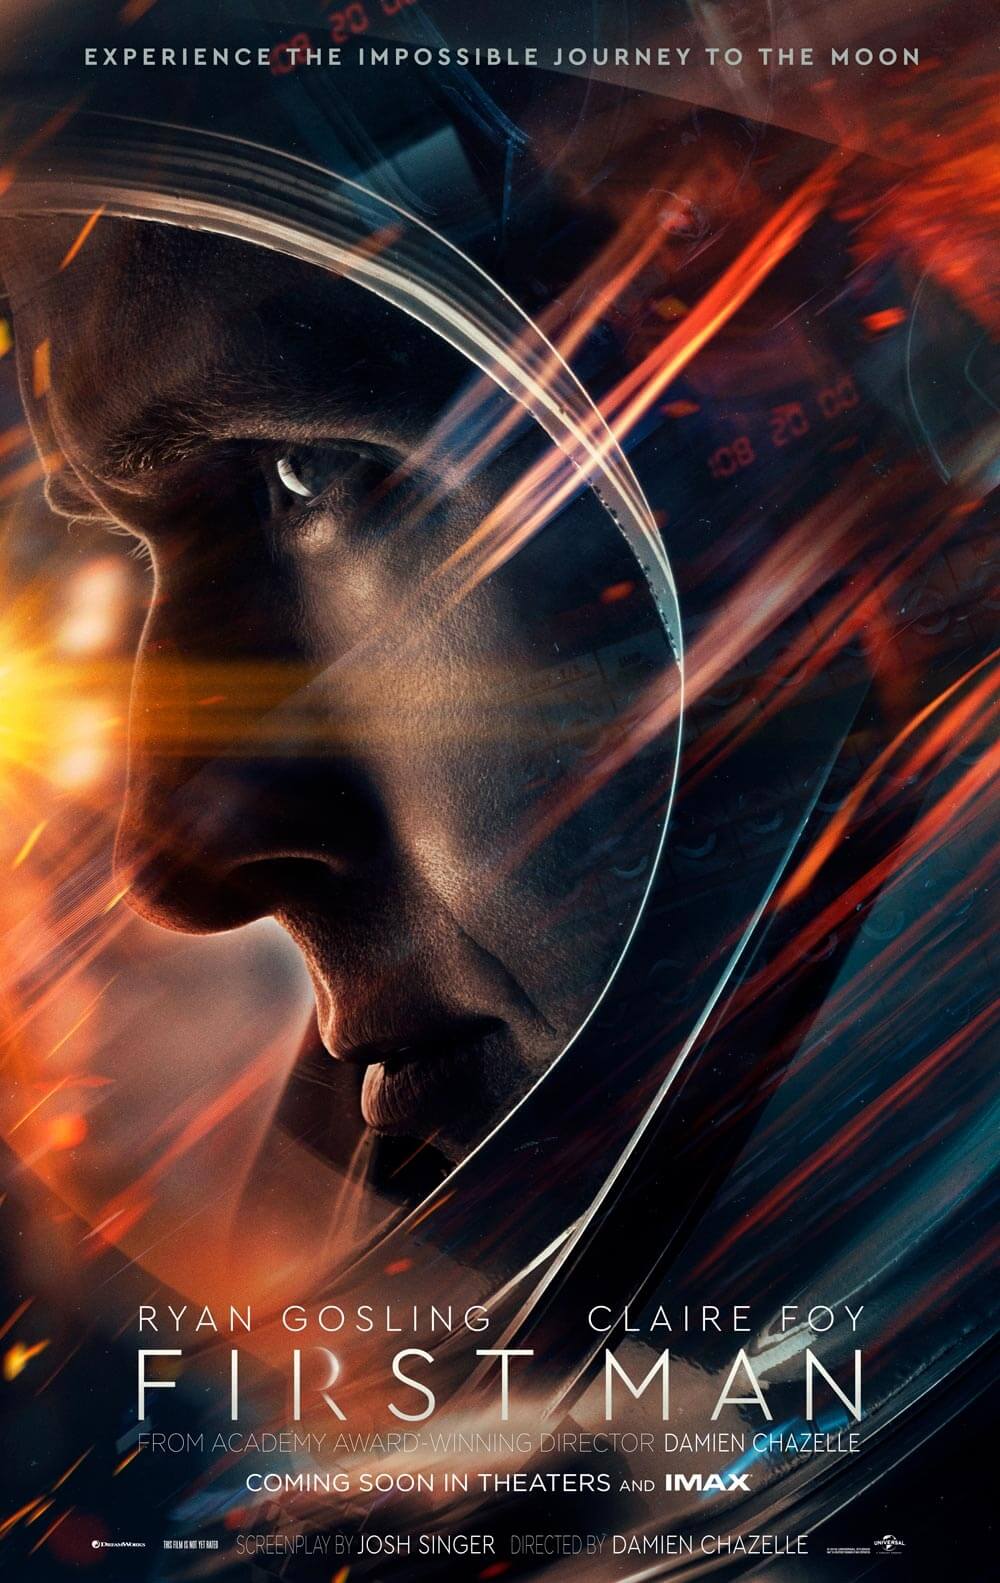 First Man Poster. In Theaters Now